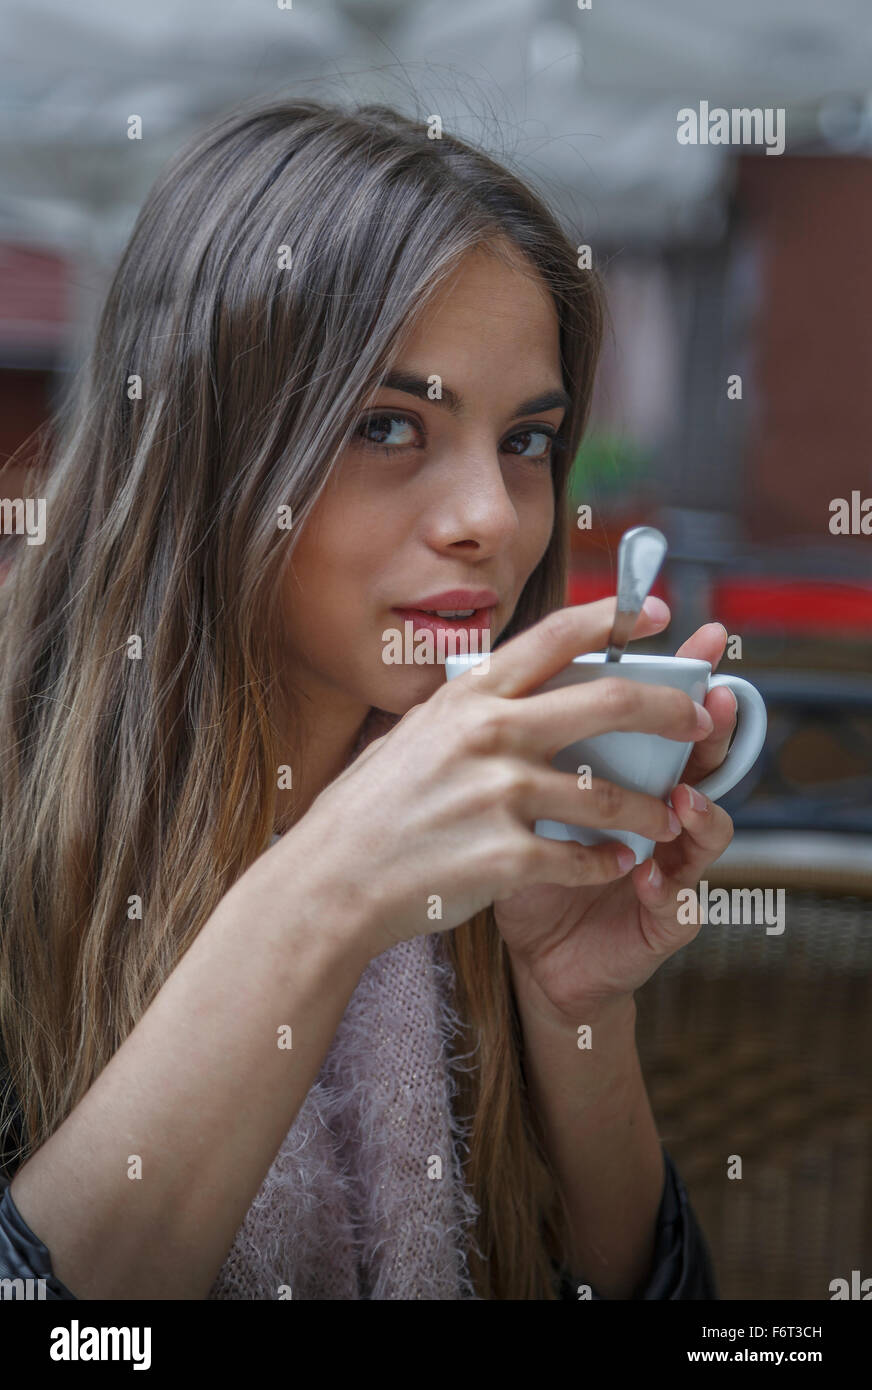 Caucasian woman drinking coffee Banque D'Images